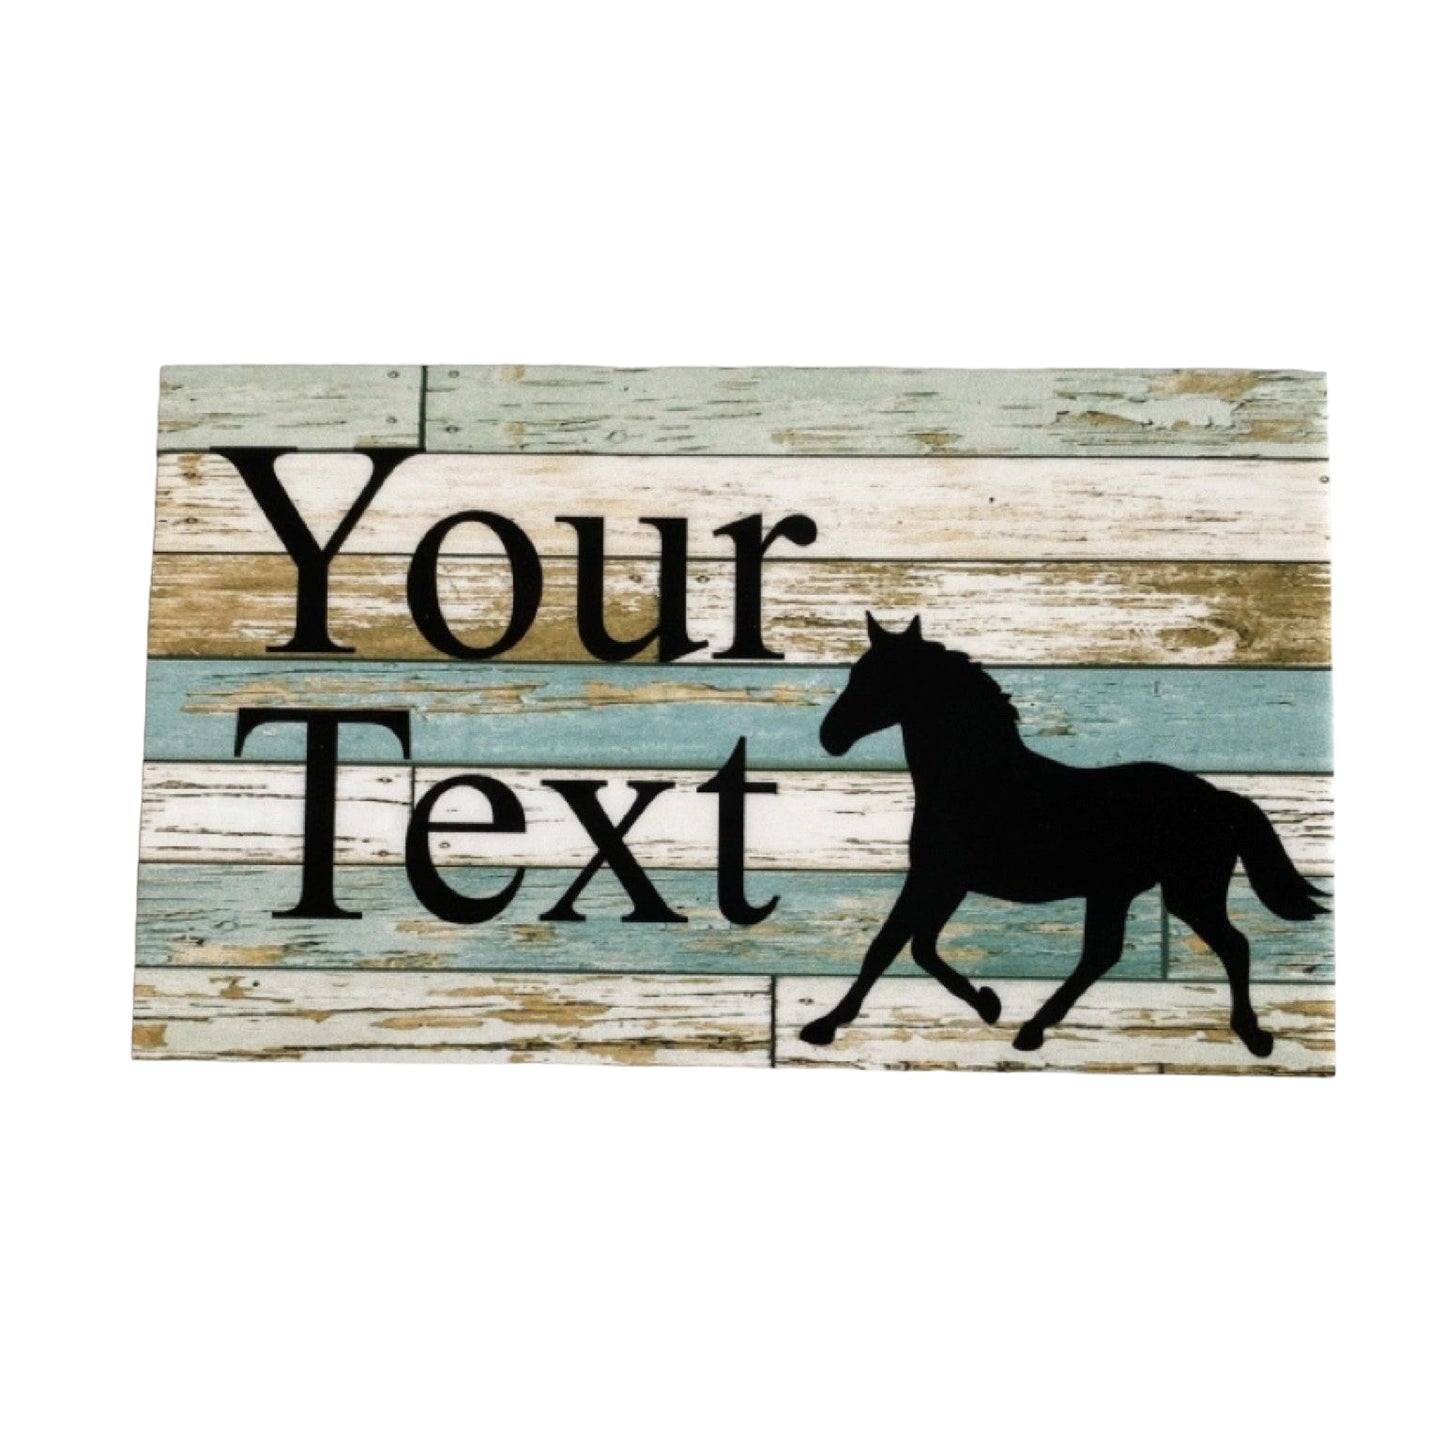 Horse Your Text Custom Wording Sign